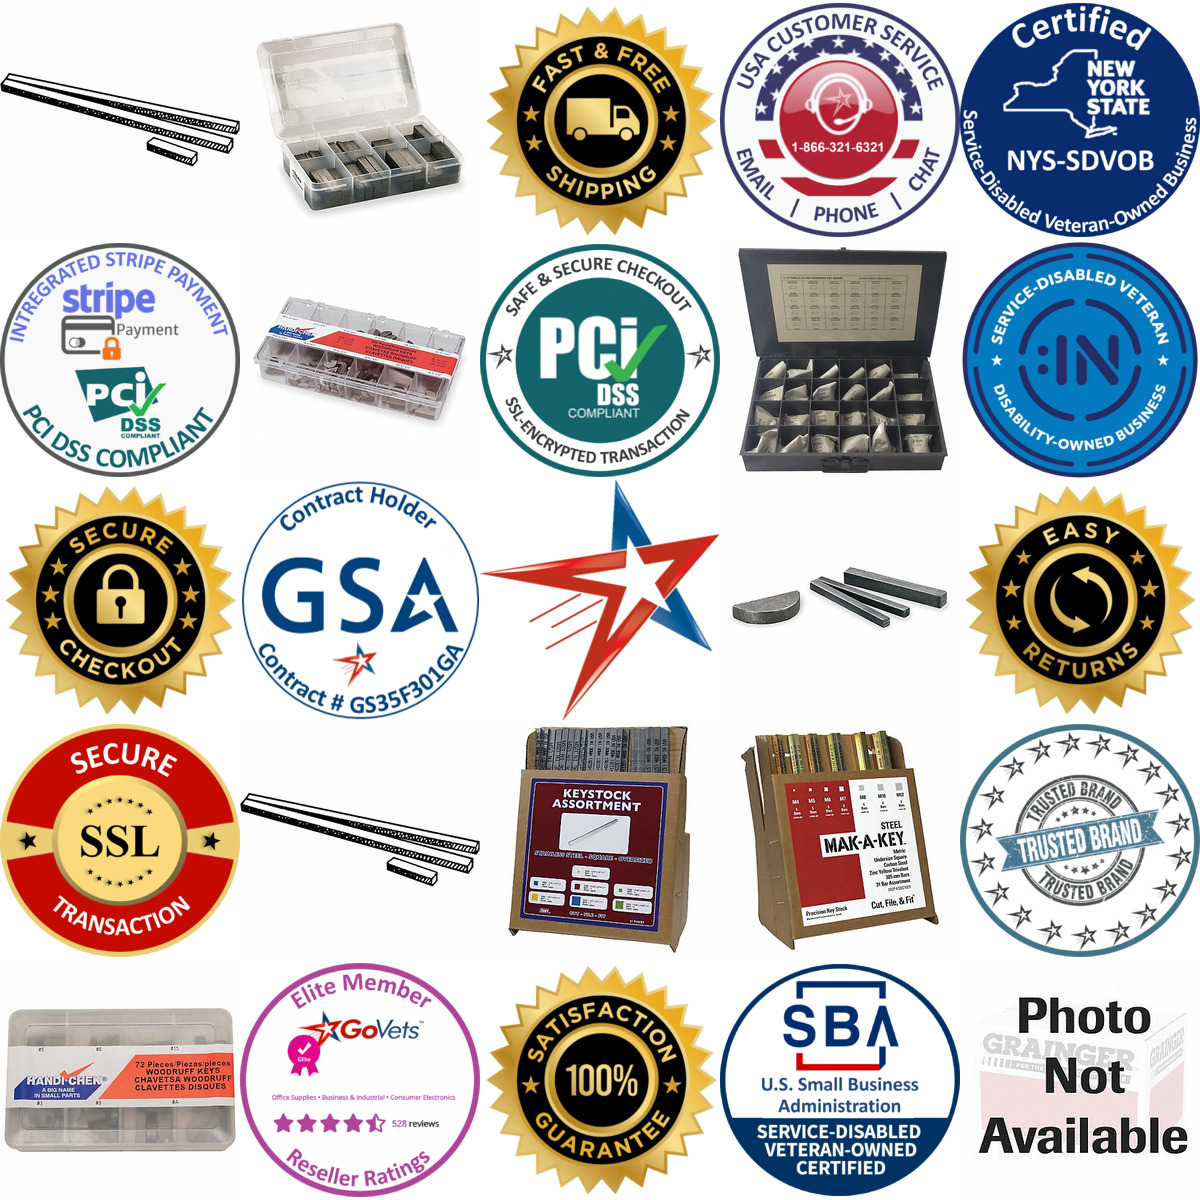 A selection of Key Stock Assortments products on GoVets